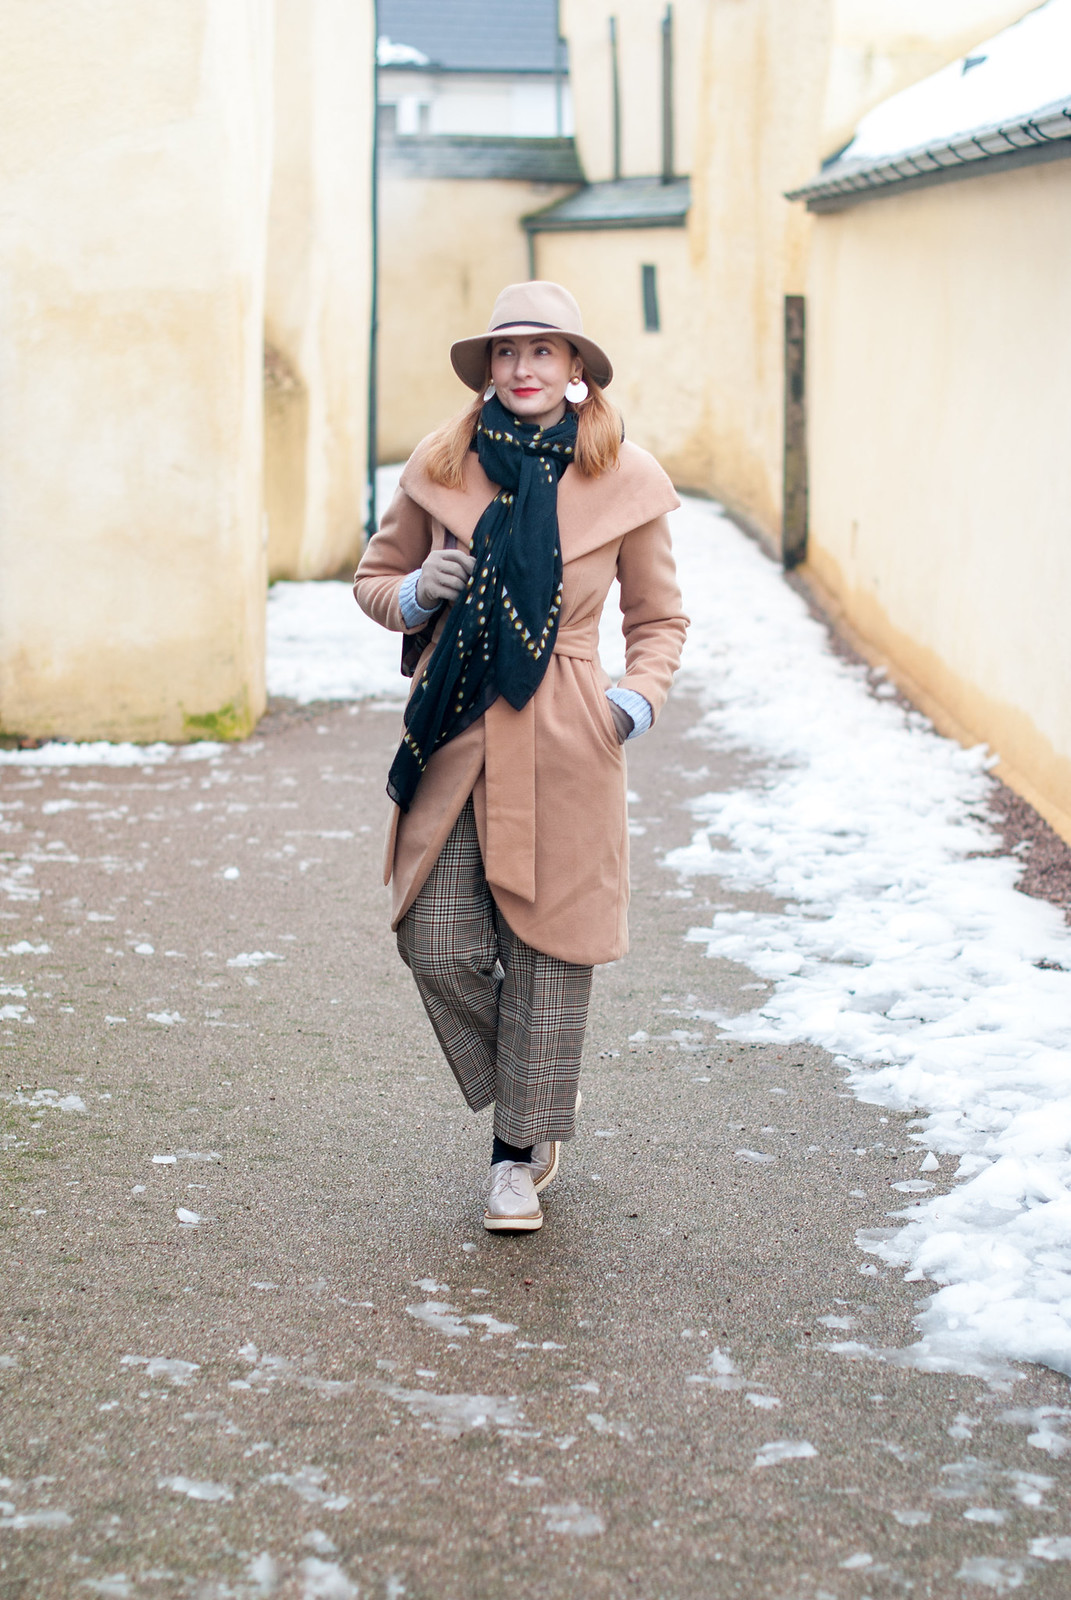 How to Stay Smart and Stylish in the Snow \ winter wear \ winter dressing \ camel wrap coat \ camel fedora hat \ wide leg crop Prince of Wales check trousers \ heritage check pants \ taupe flatform lace-ups | Not Dressed As Lamb, over 40 style